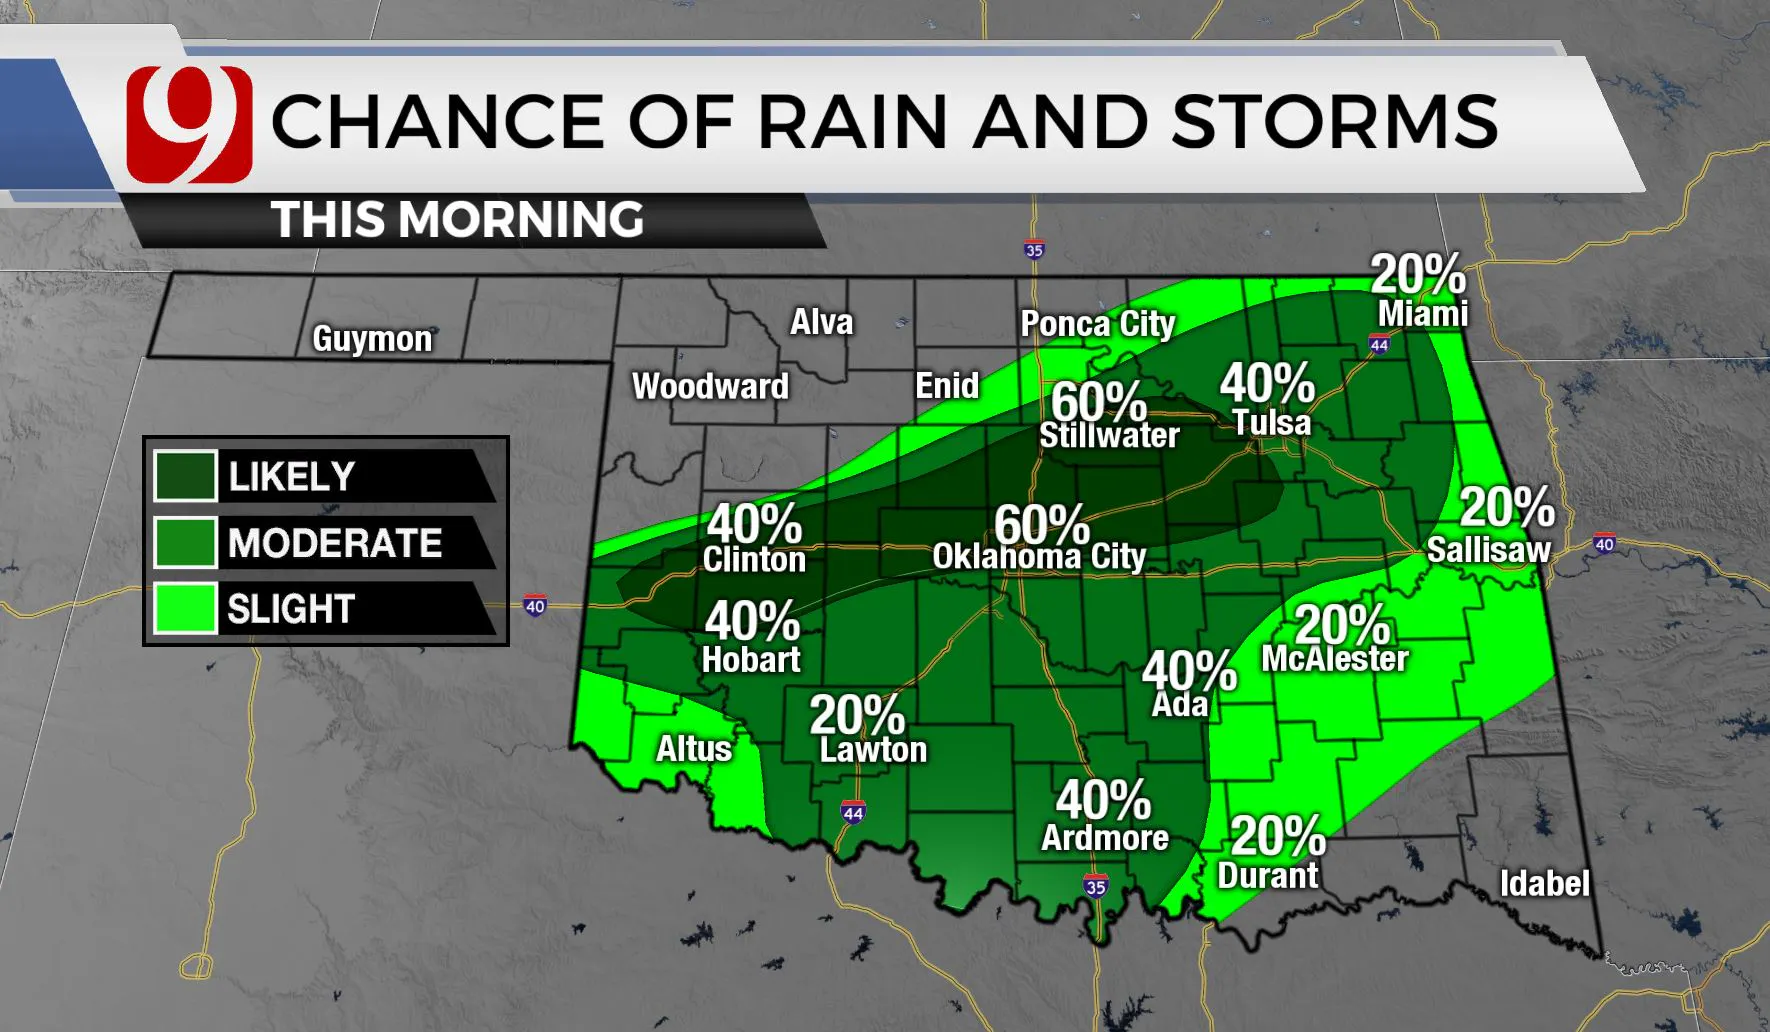 Chances of rain and storms across the state this morning.